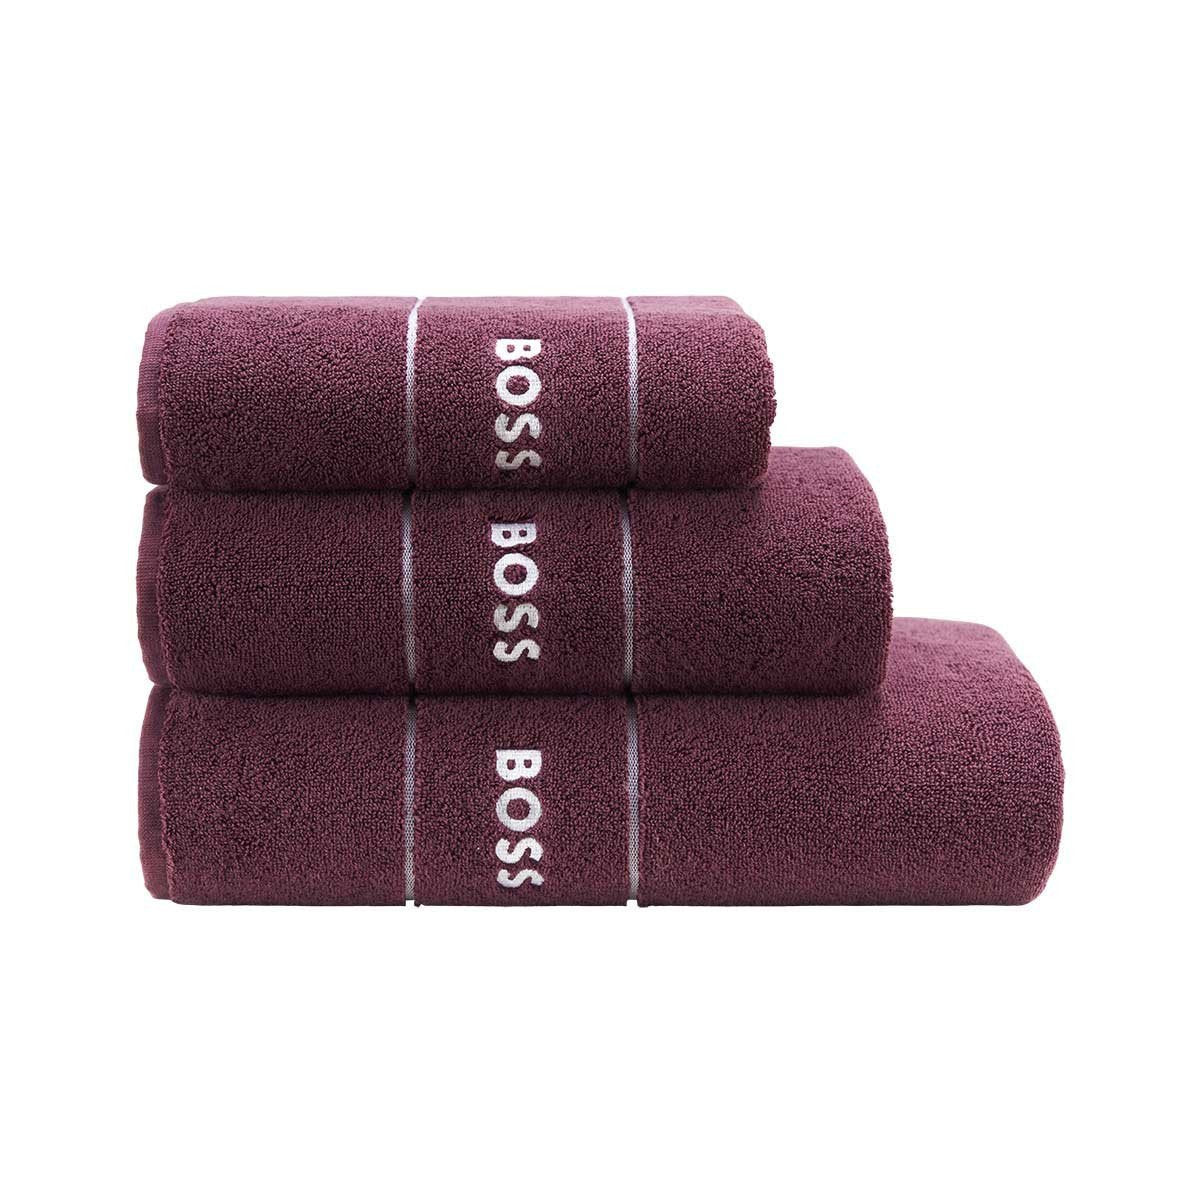 Stack - Plain Burgundy Bath Towel Collection by Hugo Boss | Fig Linens